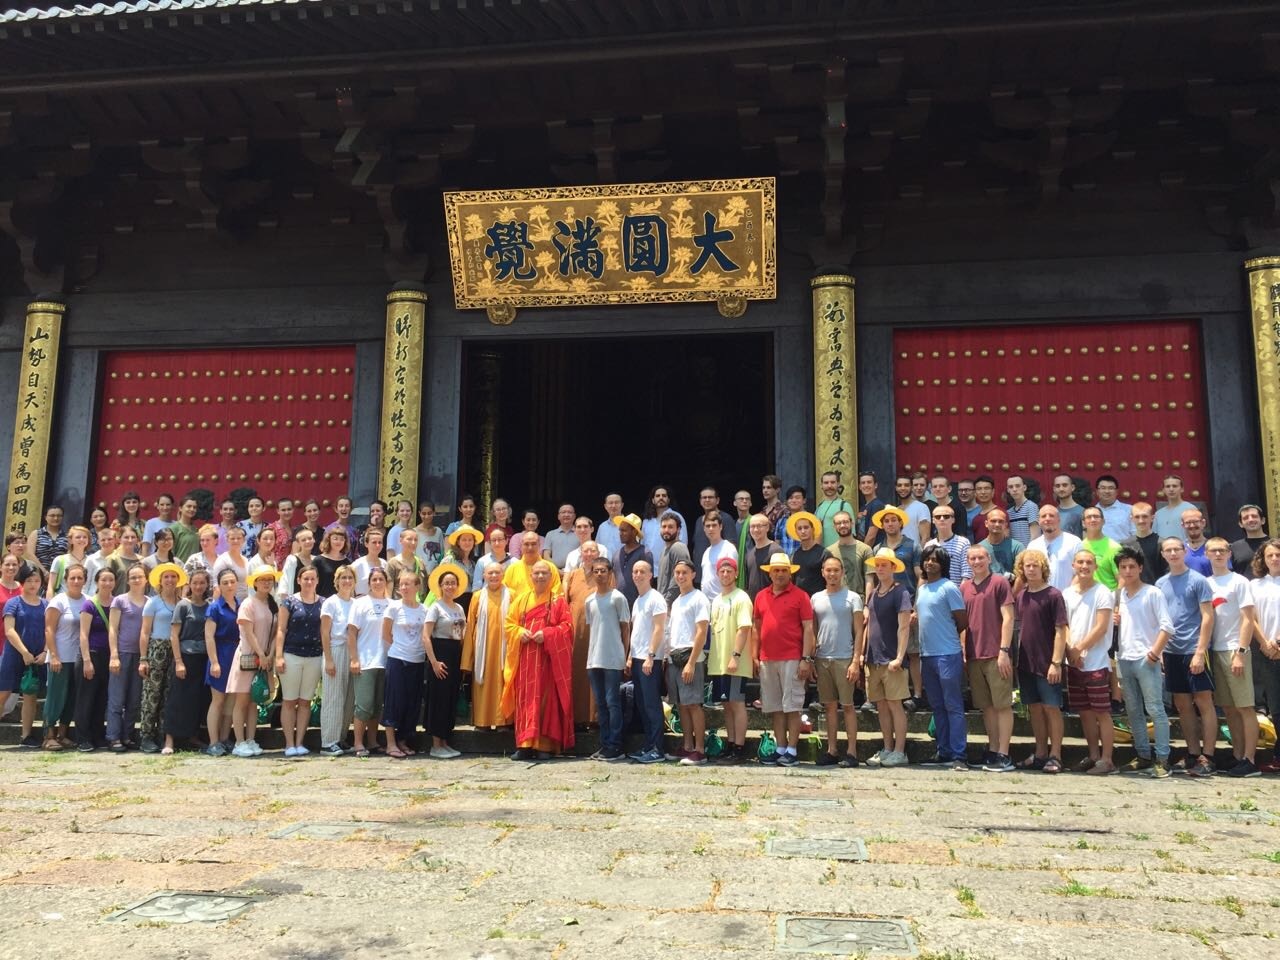 Students and teachers who took part in the Woodenfish Foundation's 2017 Humanistic Buddhism Monastic Life Program